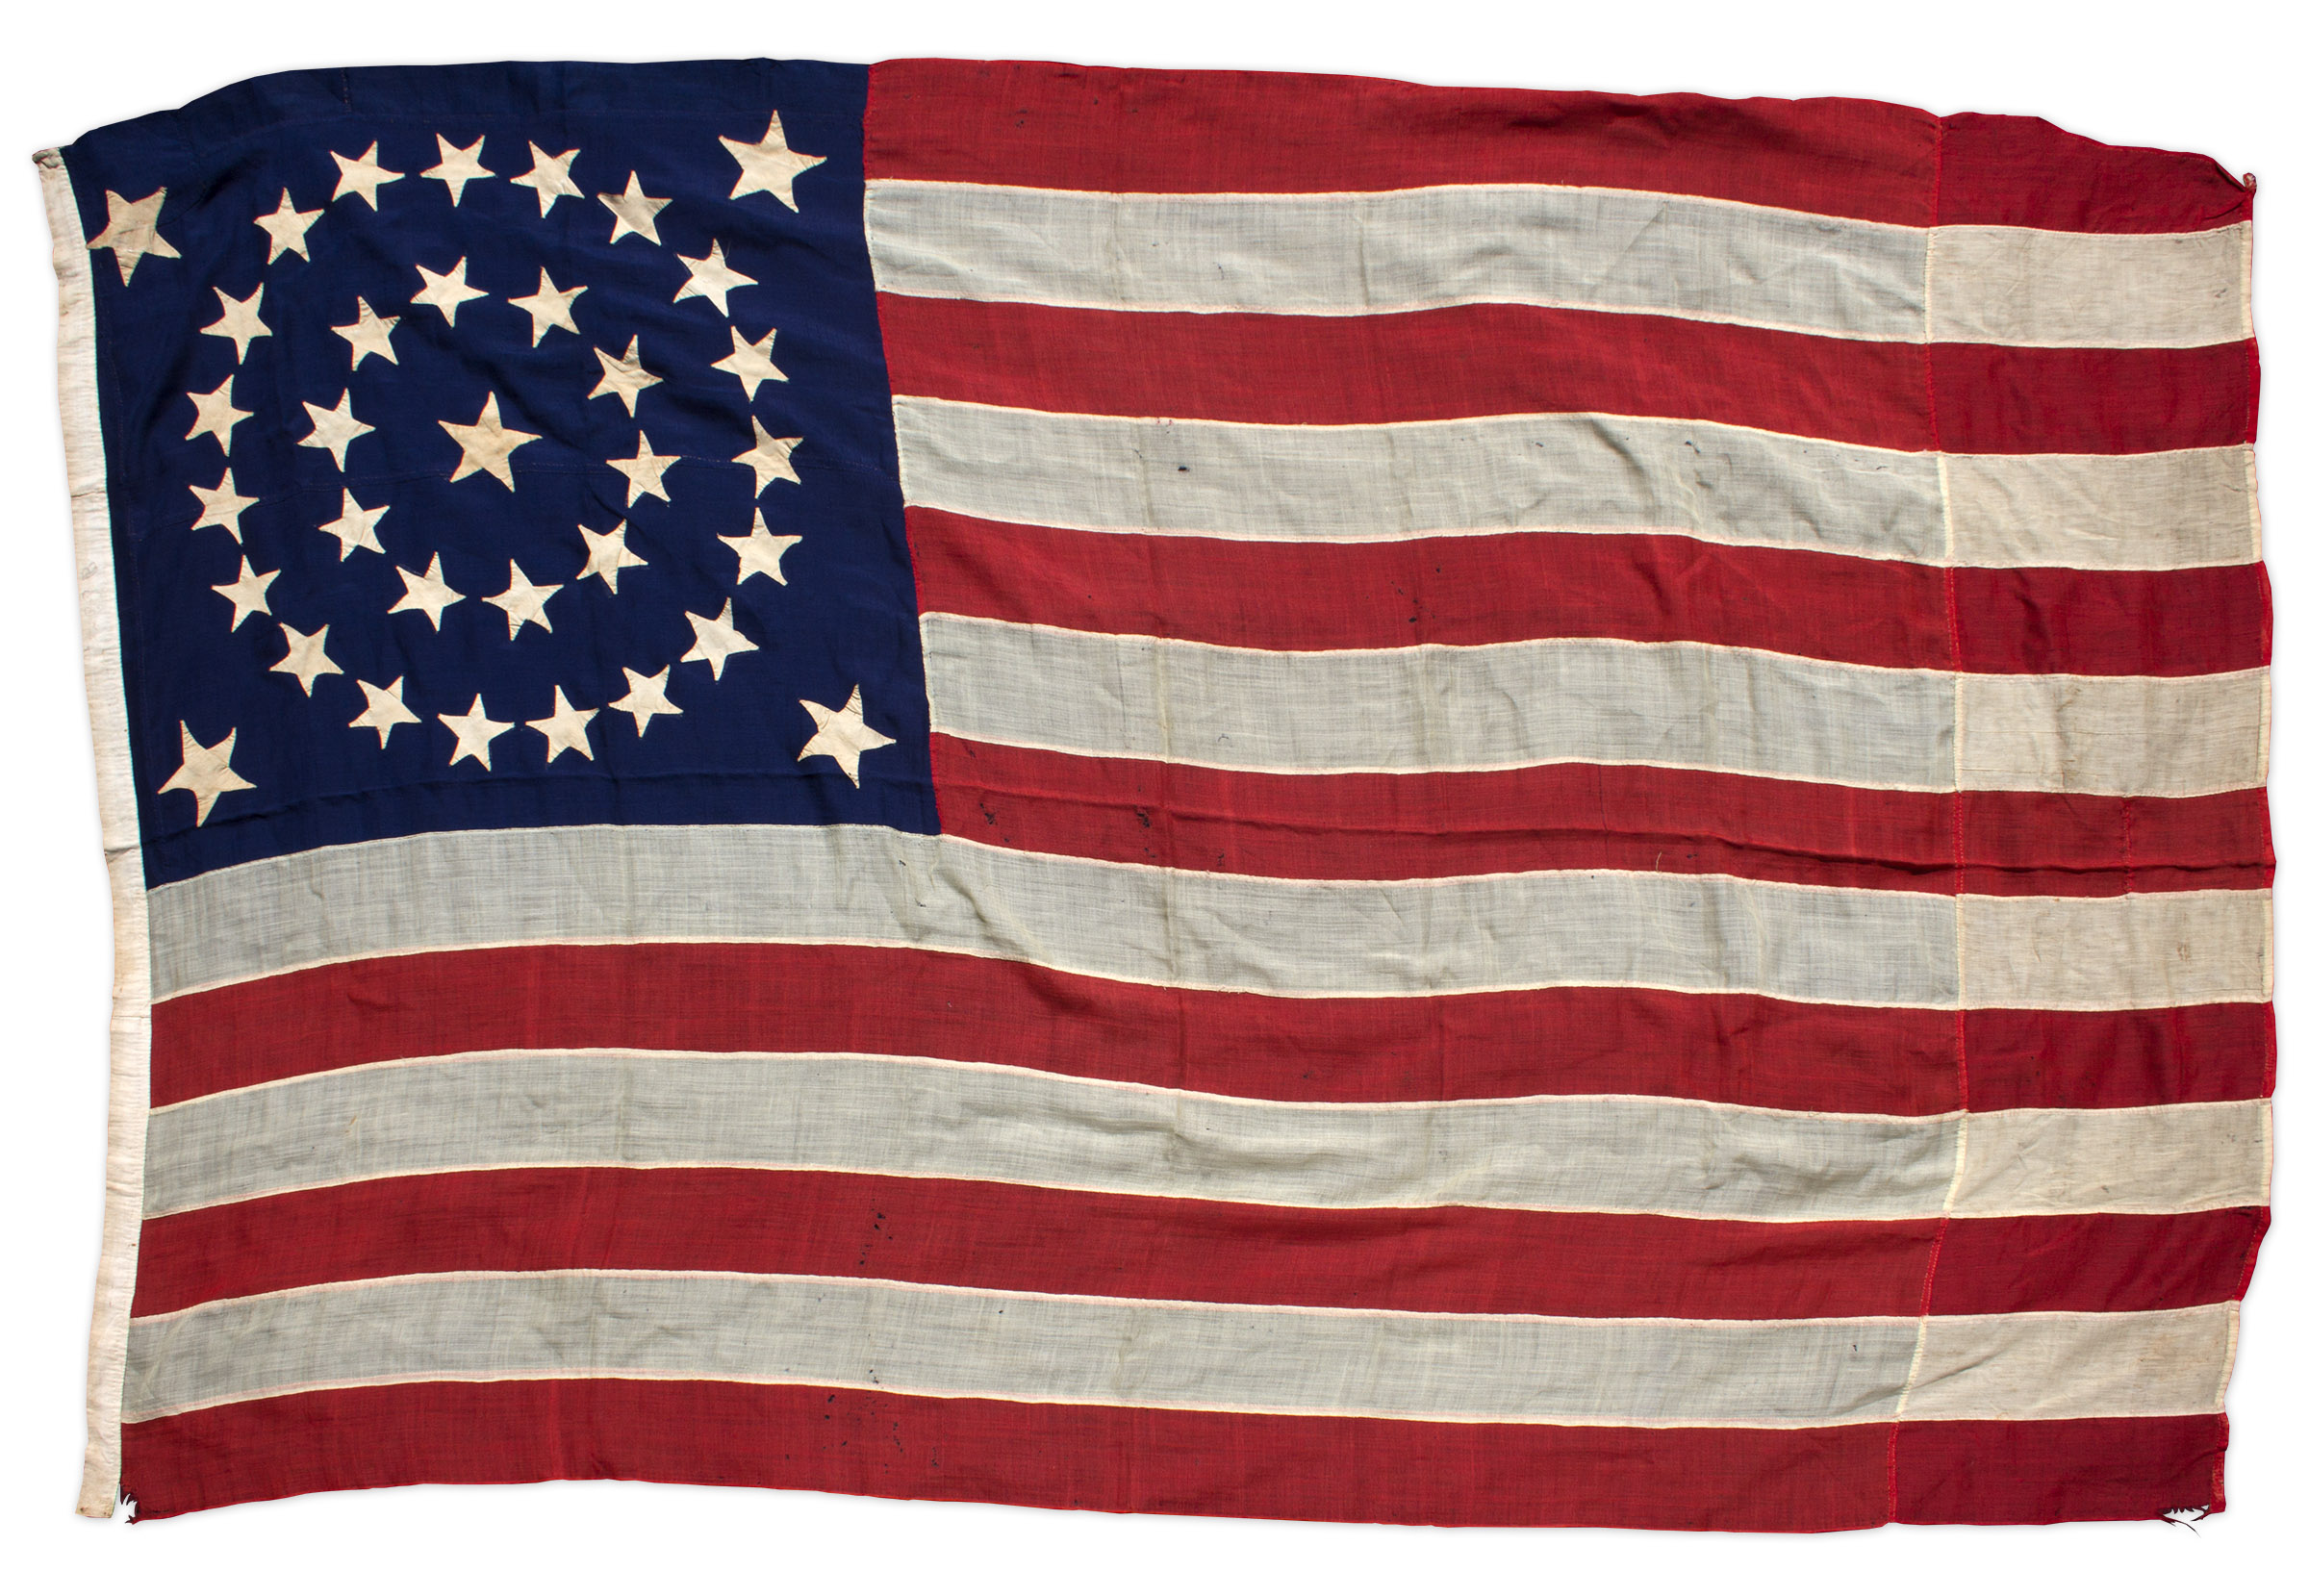 sell-an-original-vintage-16-star-american-flag-at-nate-d-sanders-auctions